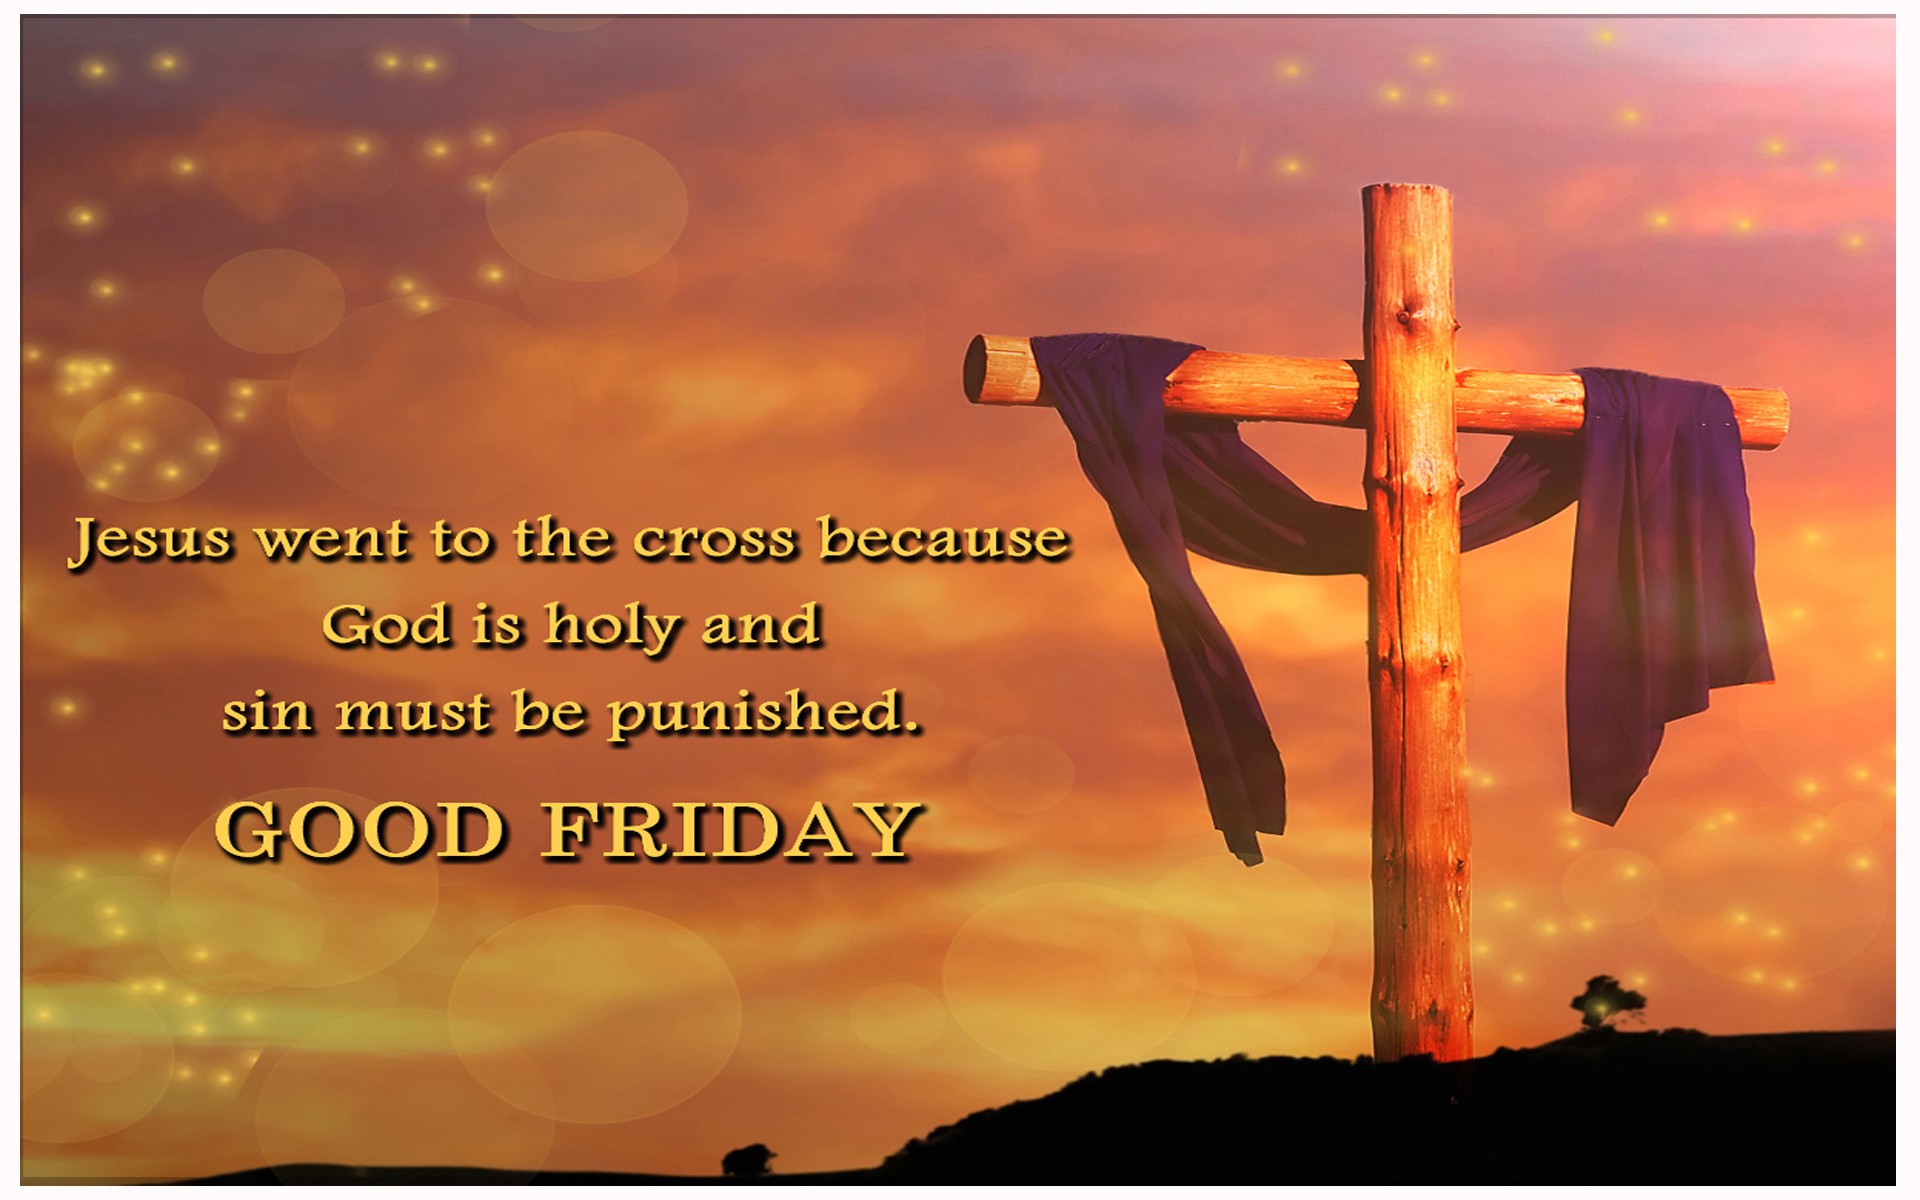 good friday light free awesome image for mobile